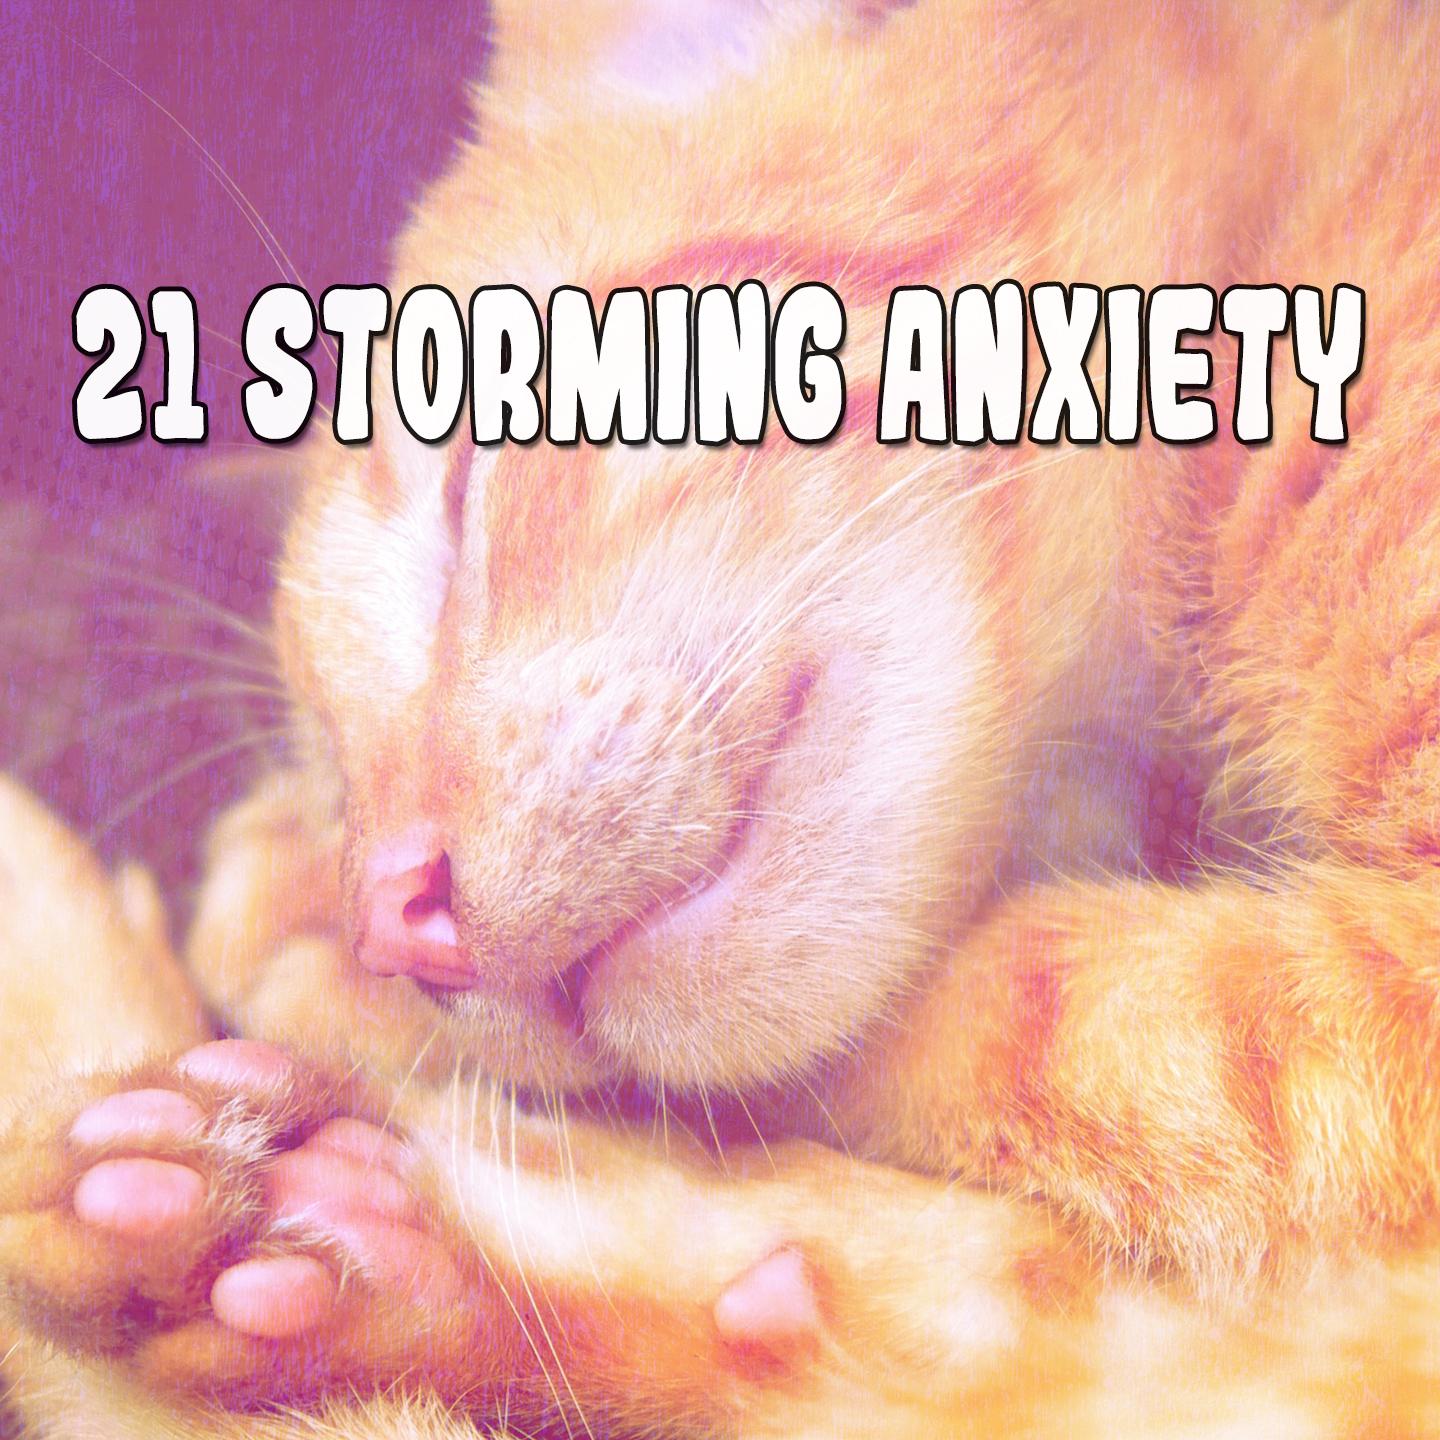 21 Storming Anxiety